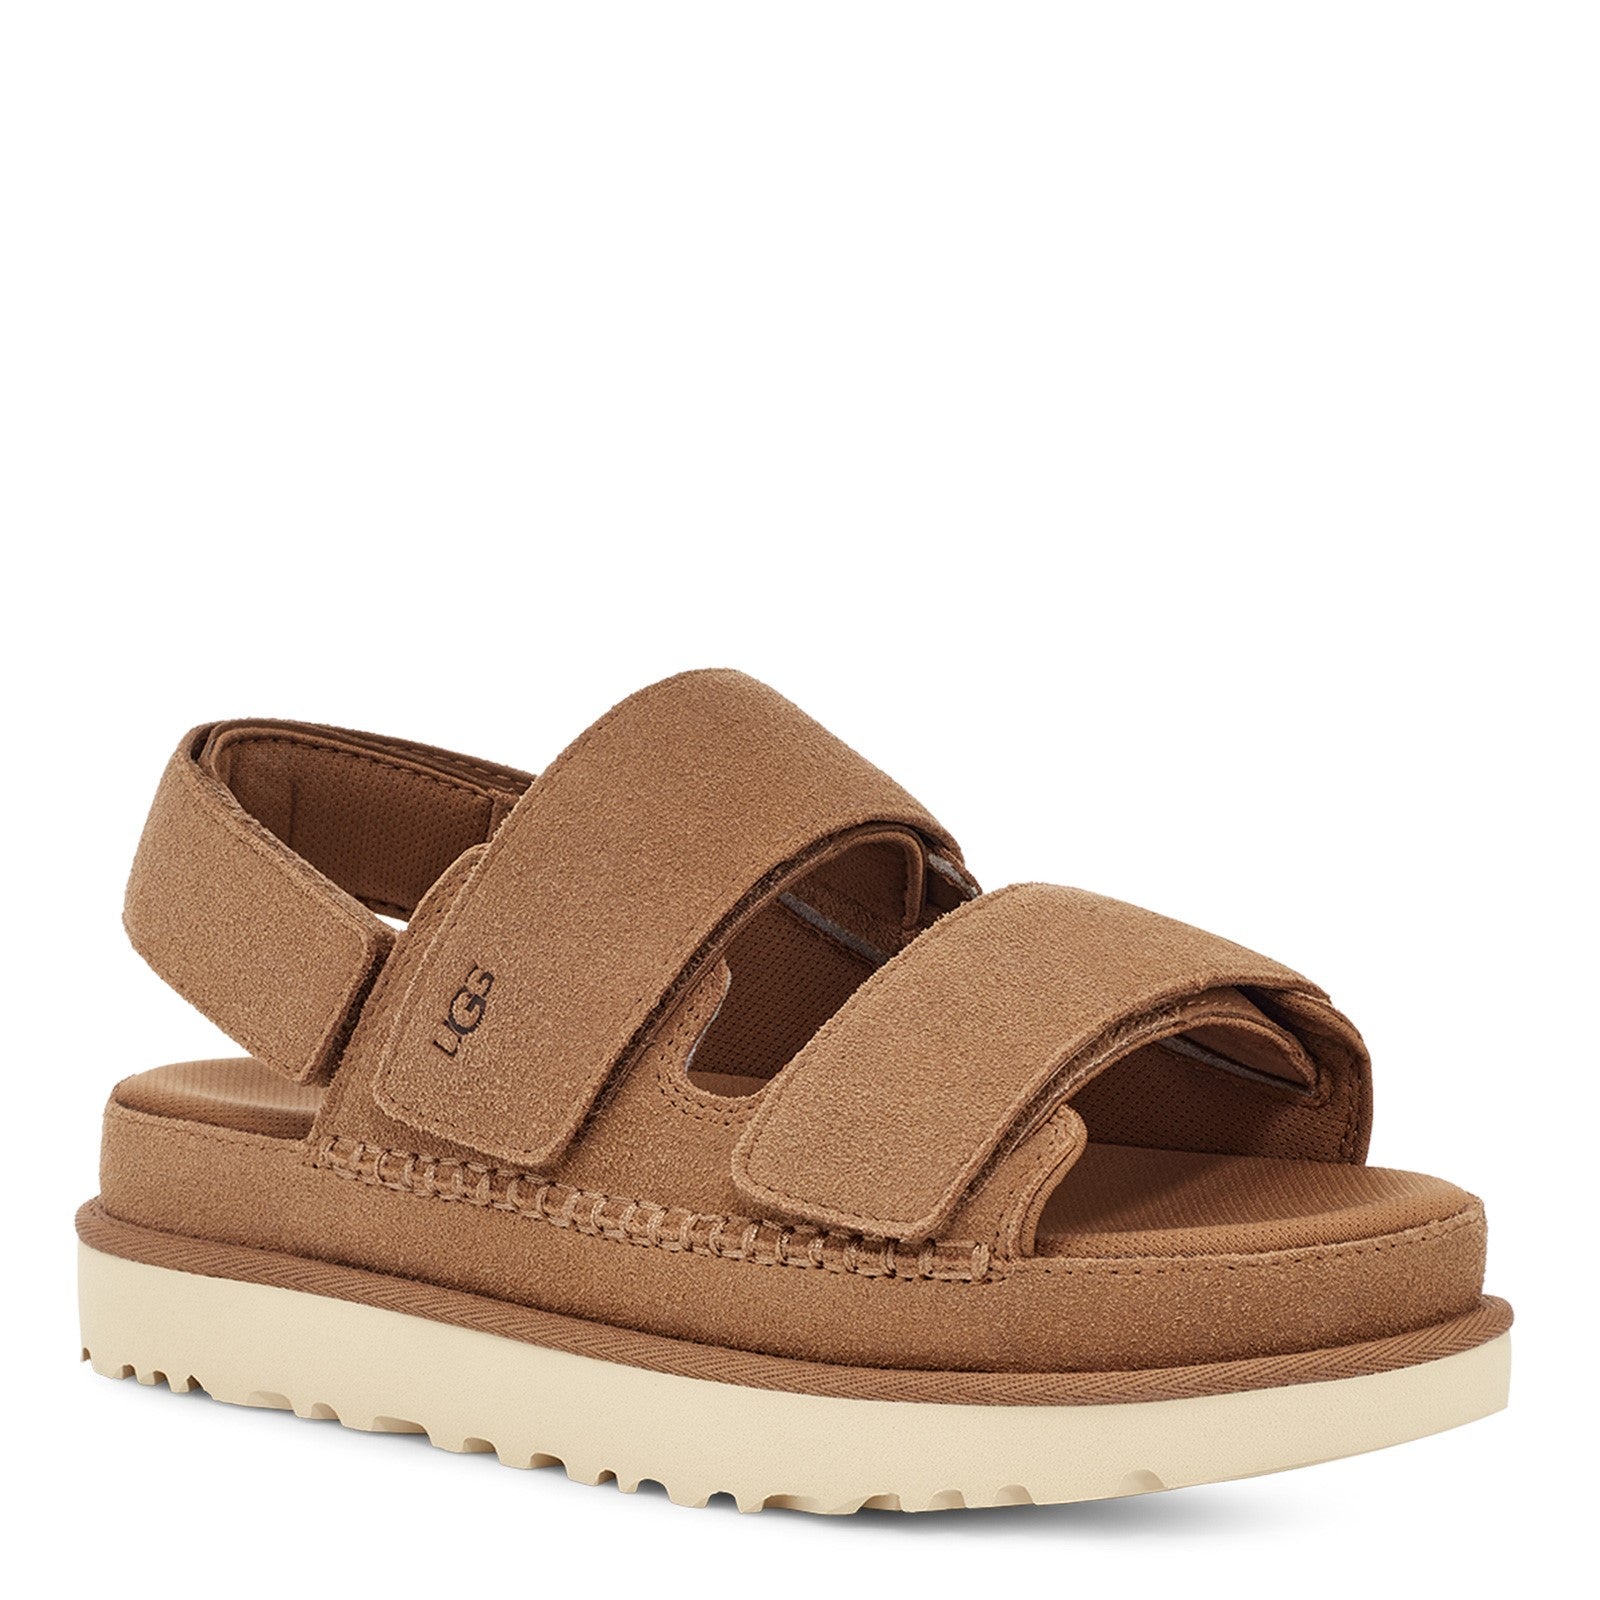 Front angle view of the Women's Goldenstar Sling by UGG in the color Chestnut